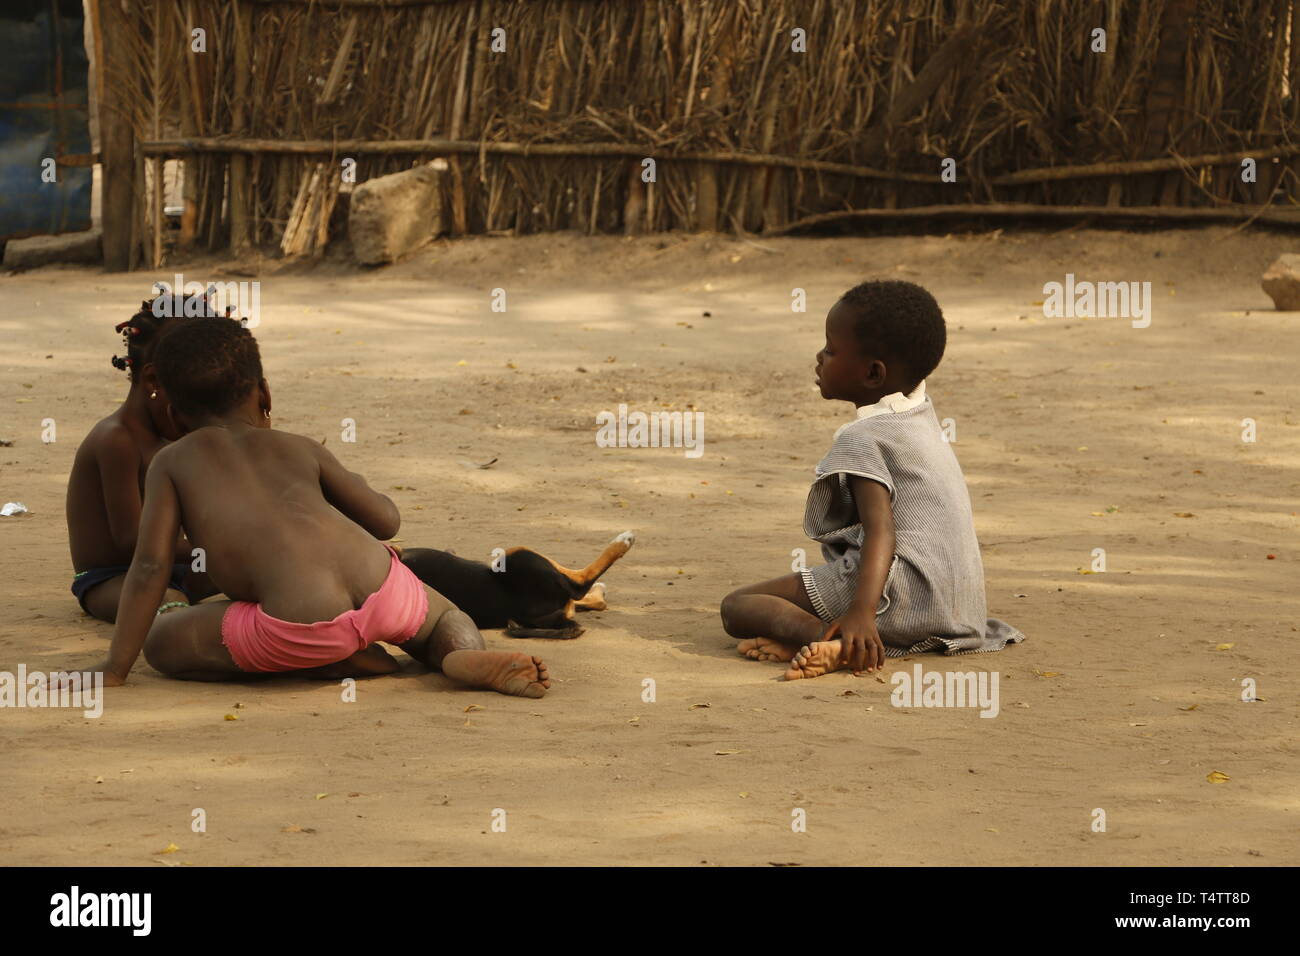 Countryside in Togo, Children playing with a dog. Stock Photo